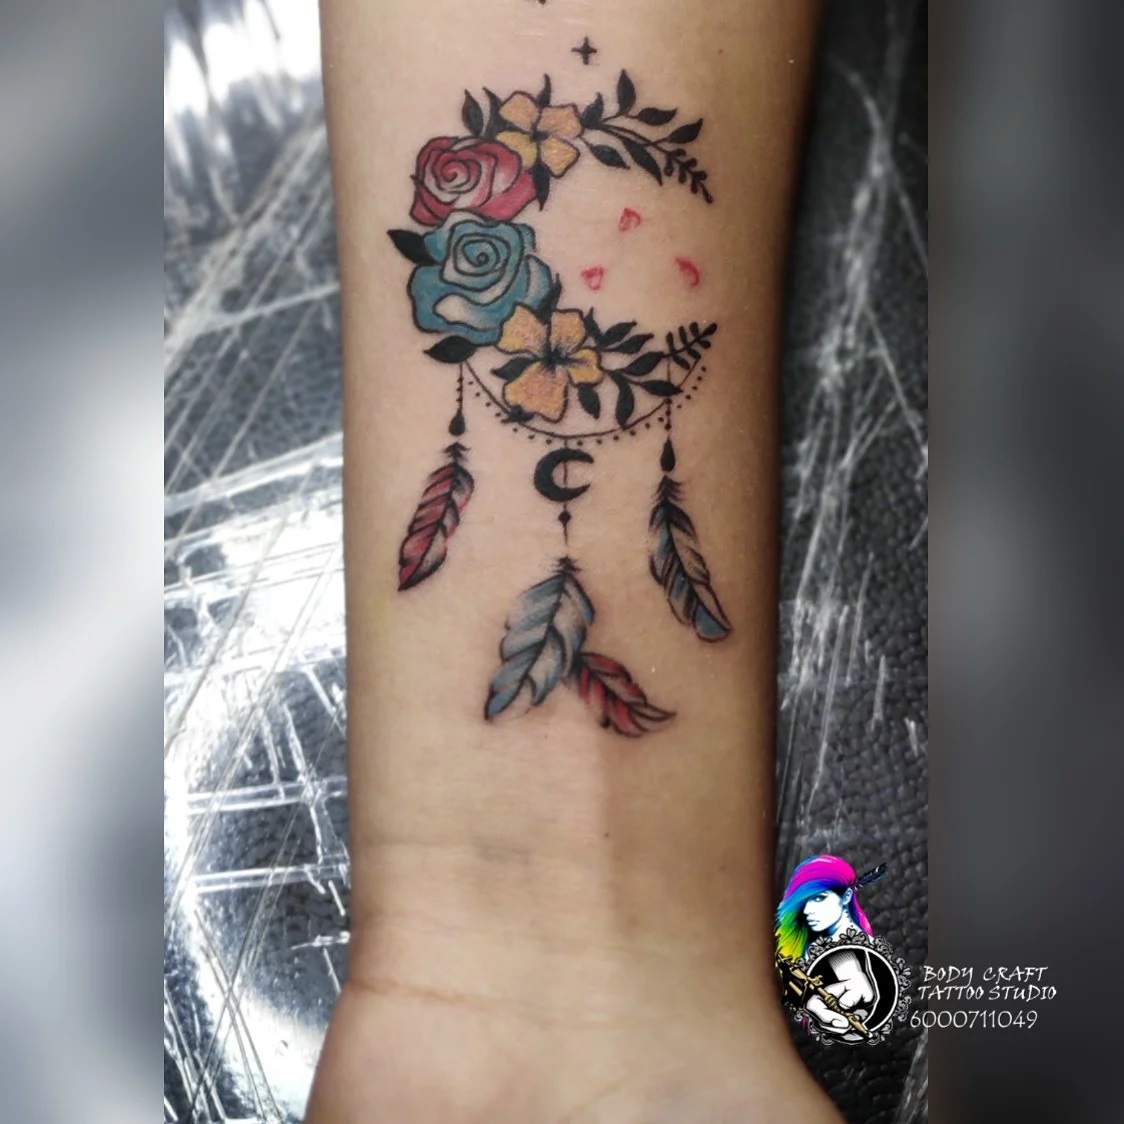 The floral dream catcher tattoo design can be interpreted in many ways, but the most common interpretation is that it represents the idea that dreams are like flowers—they grow from something small into something beautiful, and they can be shared with others.